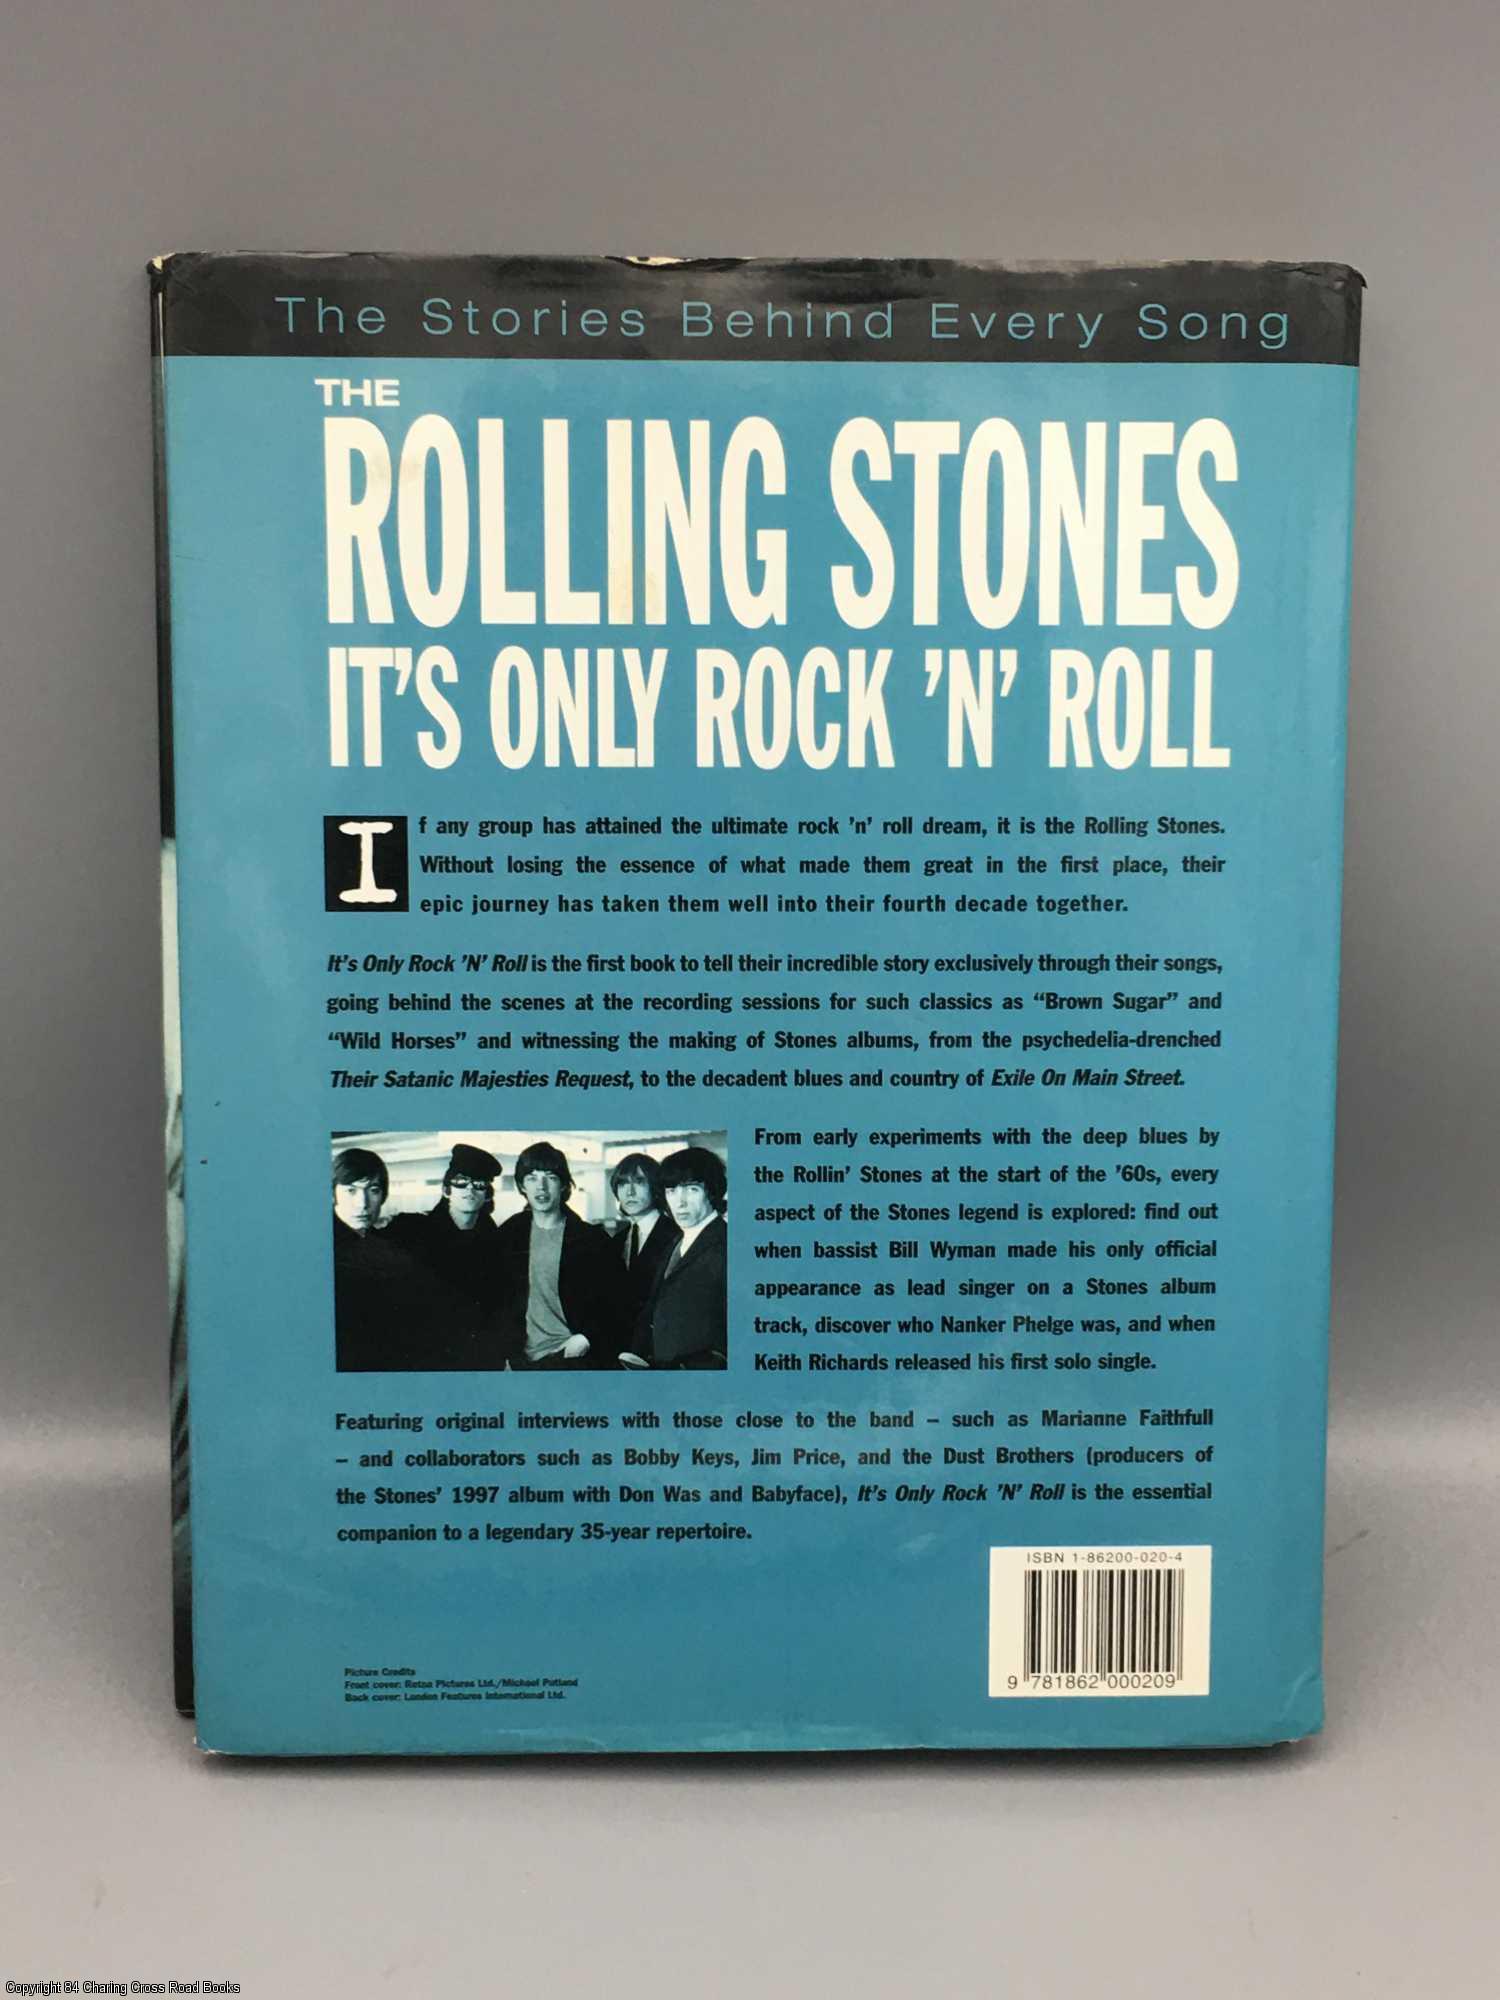 The Rolling Stones Its Only Rock 'n' Roll. The stories behind every song by  Steve Appleford on 84 Charing Cross Rare Books